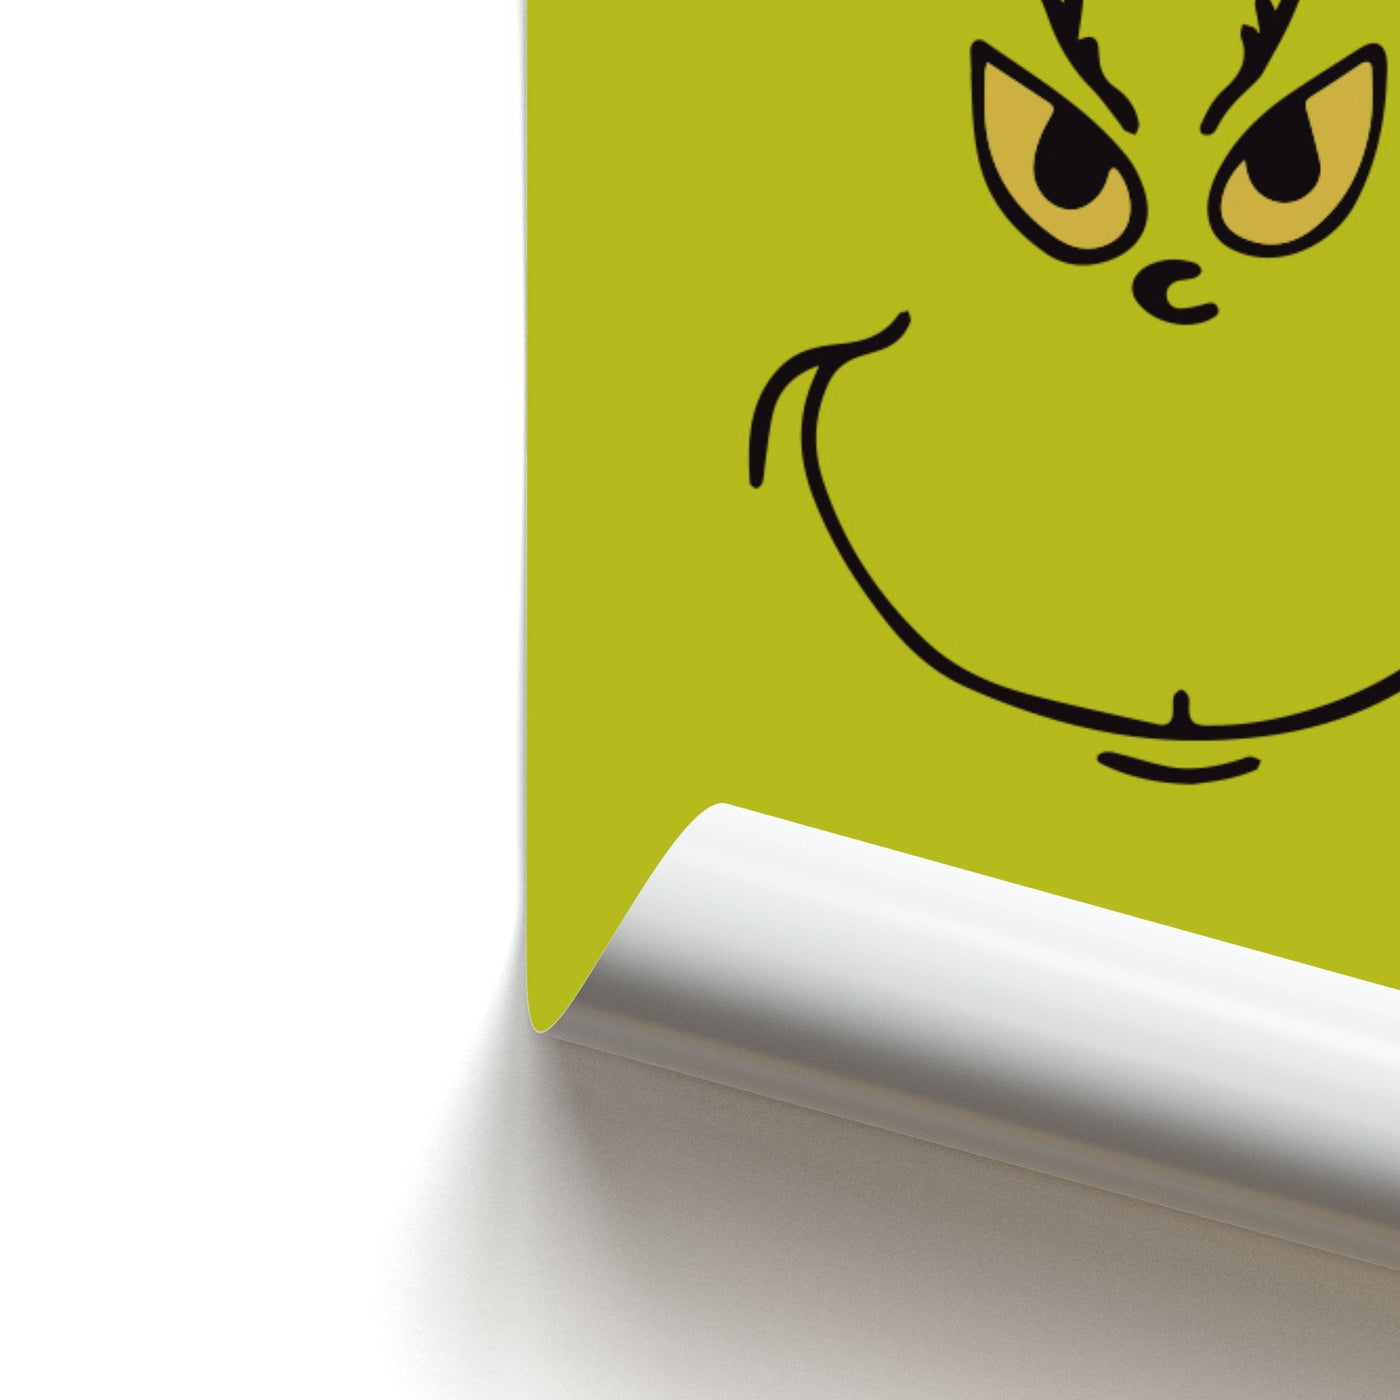 Grinch Smile Poster